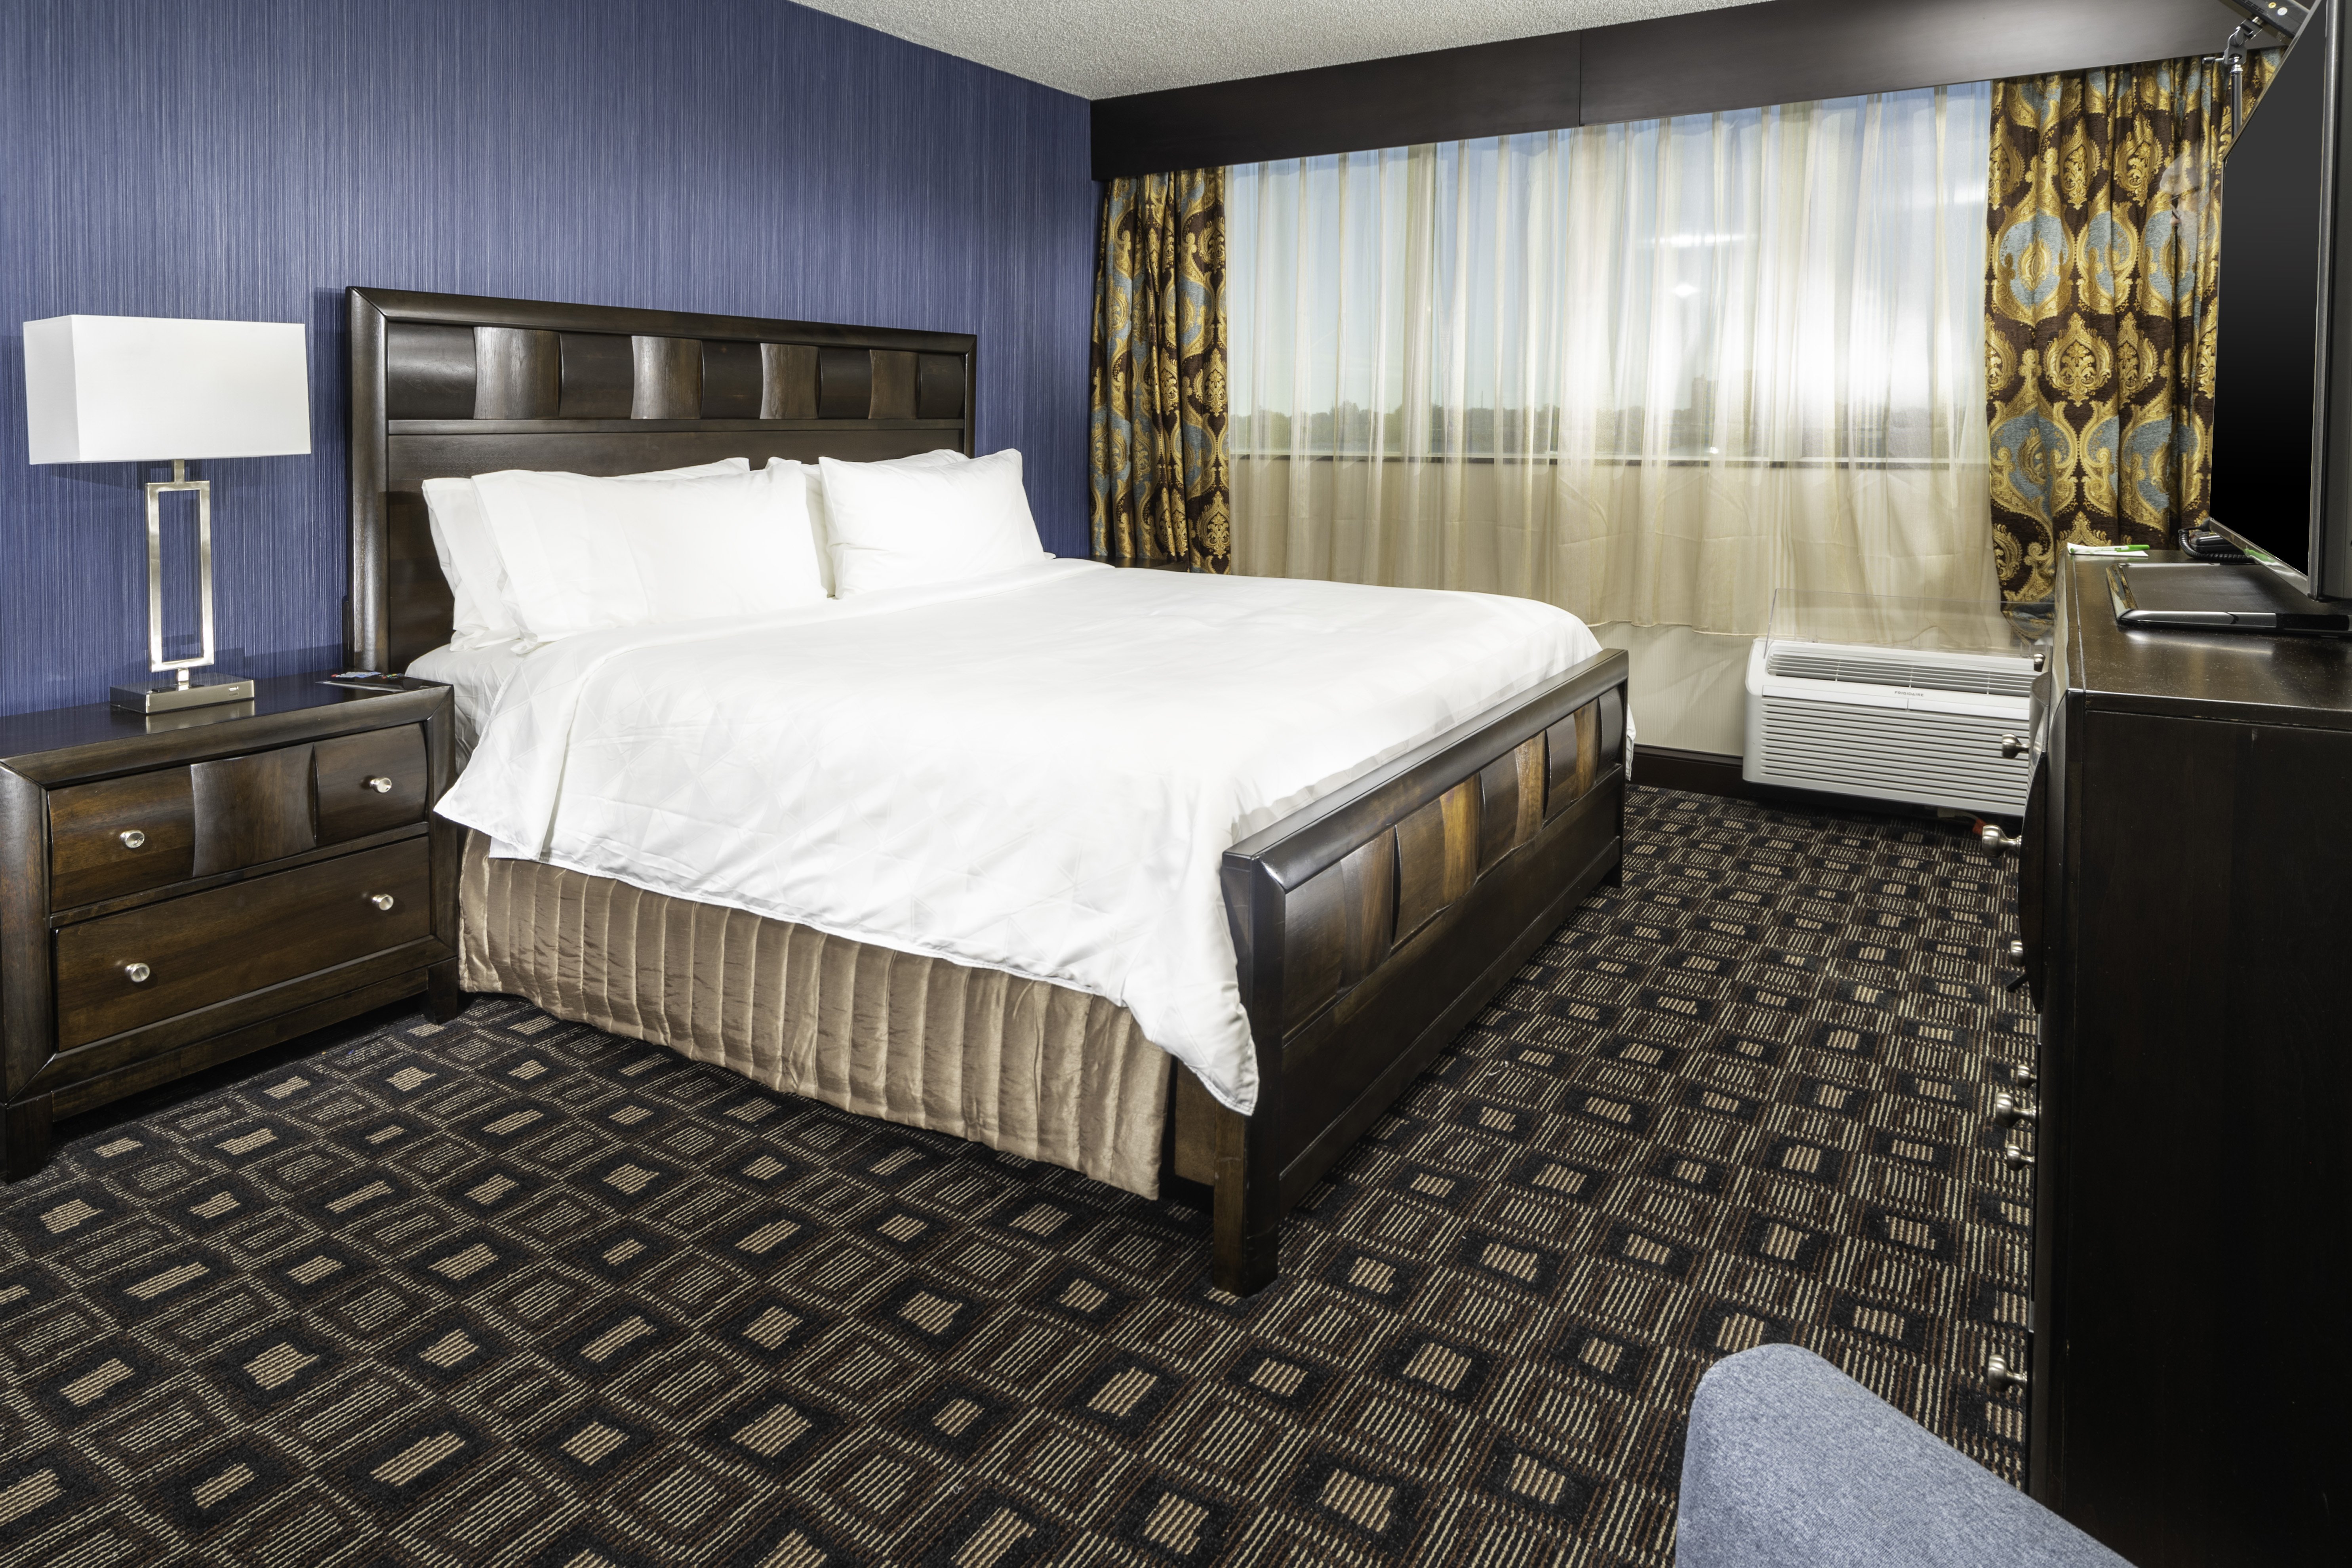 Make yourself at home in our guest rooms.